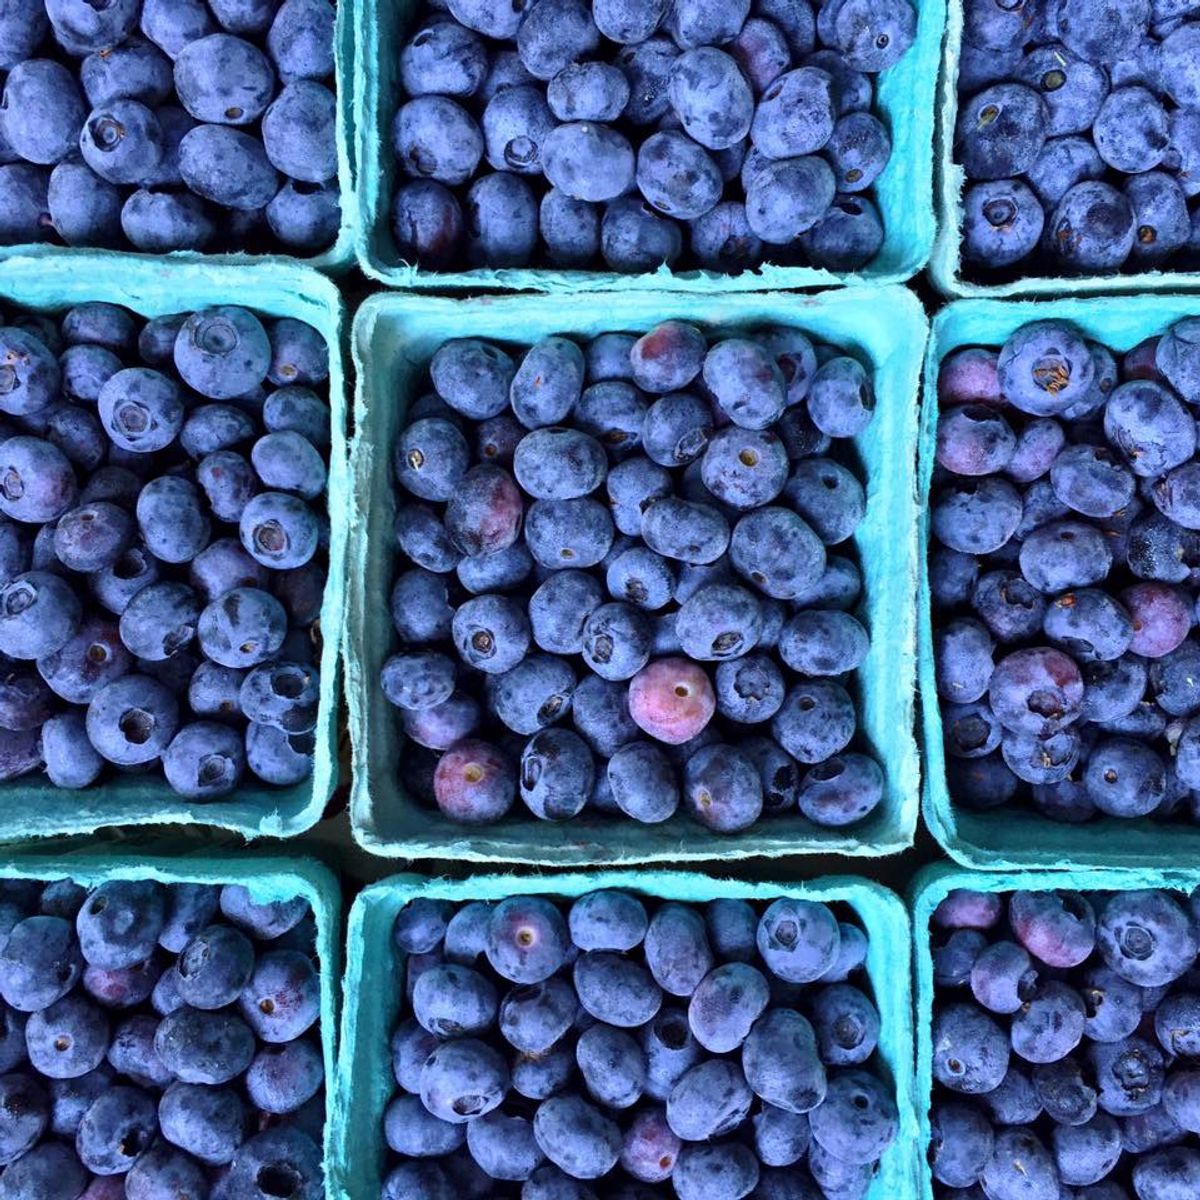 Top 11 Reasons To Shop at Farmers Markets